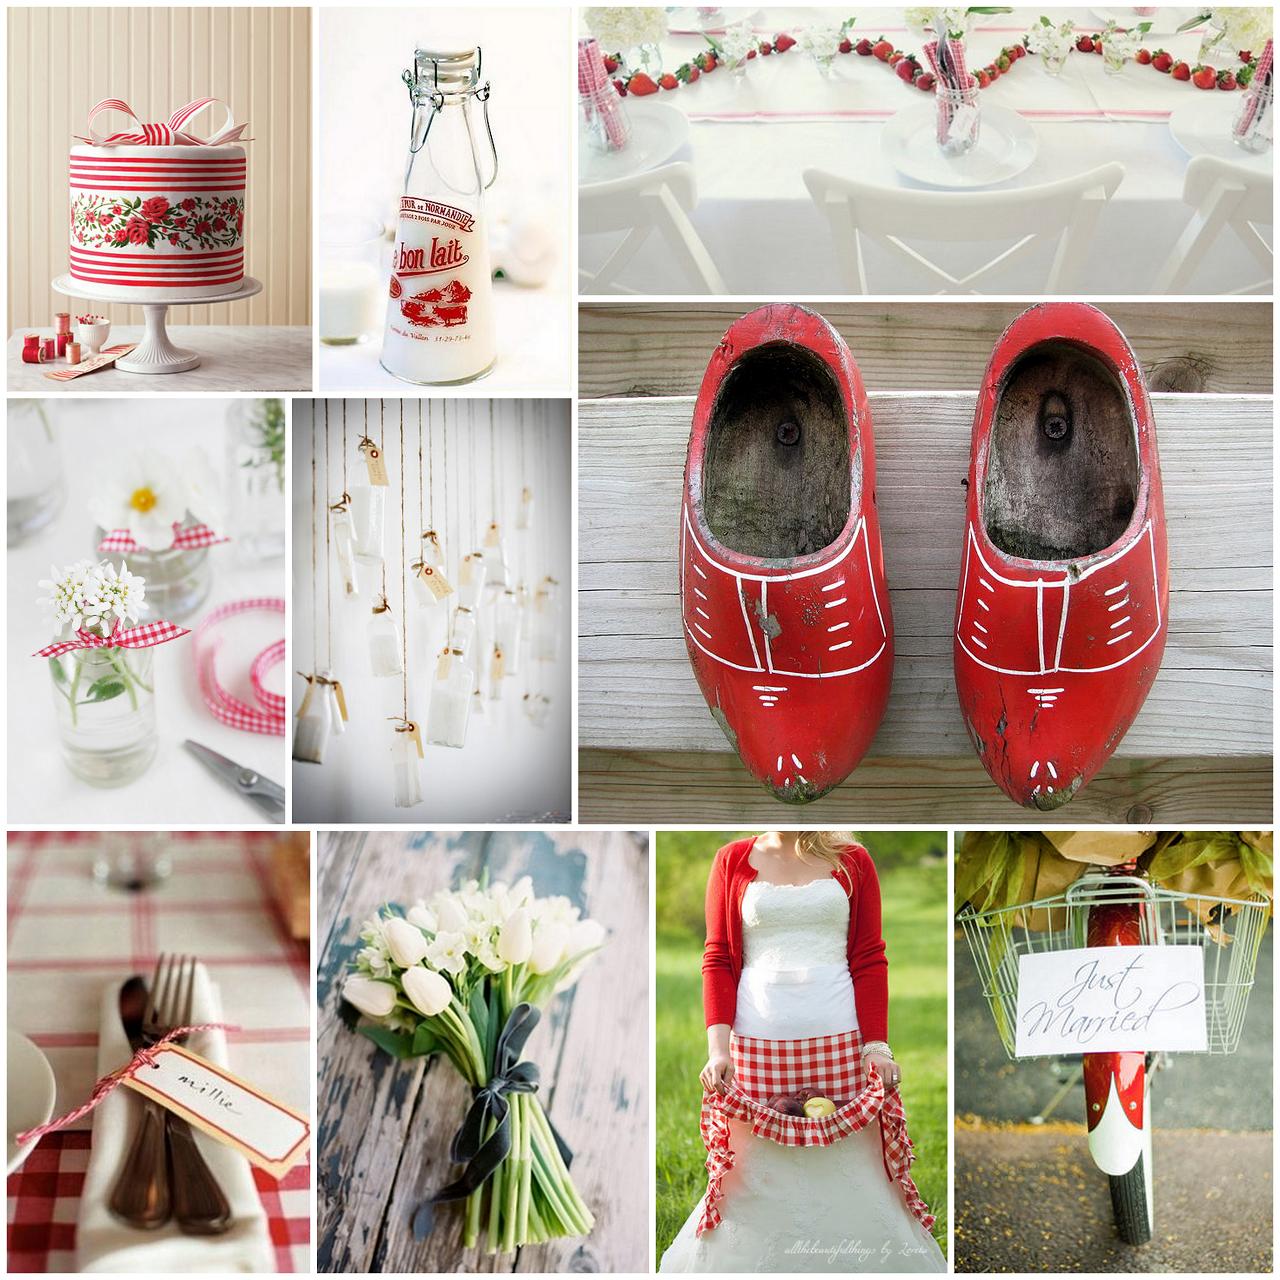 glass centerpieces and red